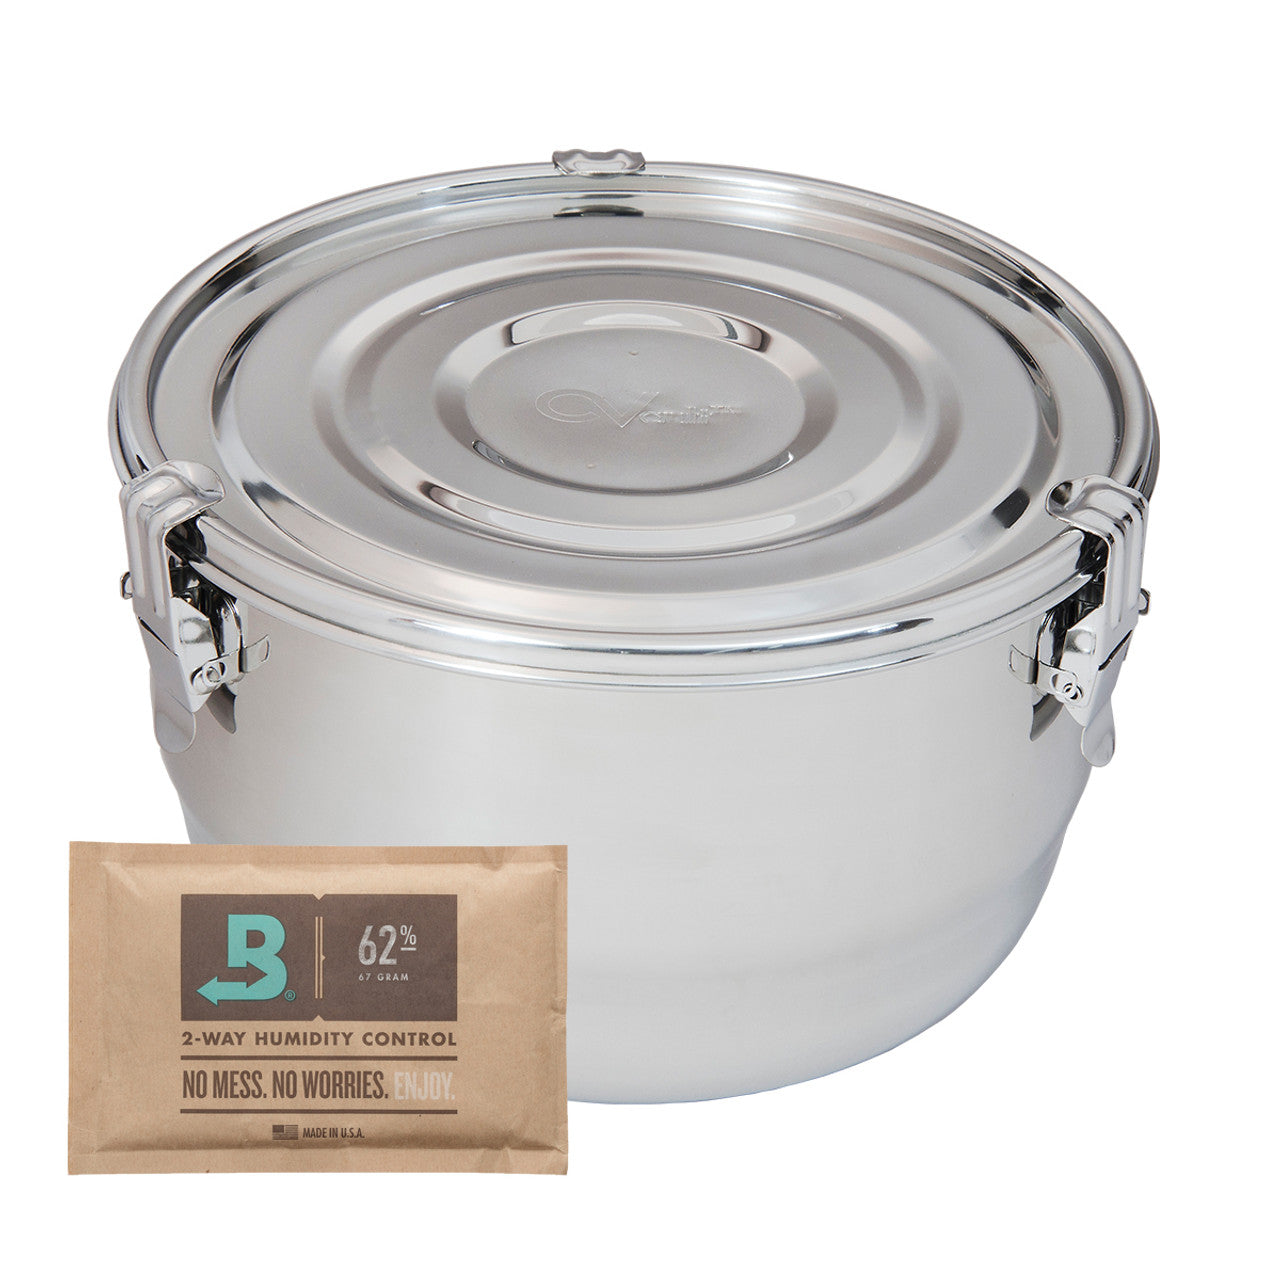 Cvault- Stainless Steel Container